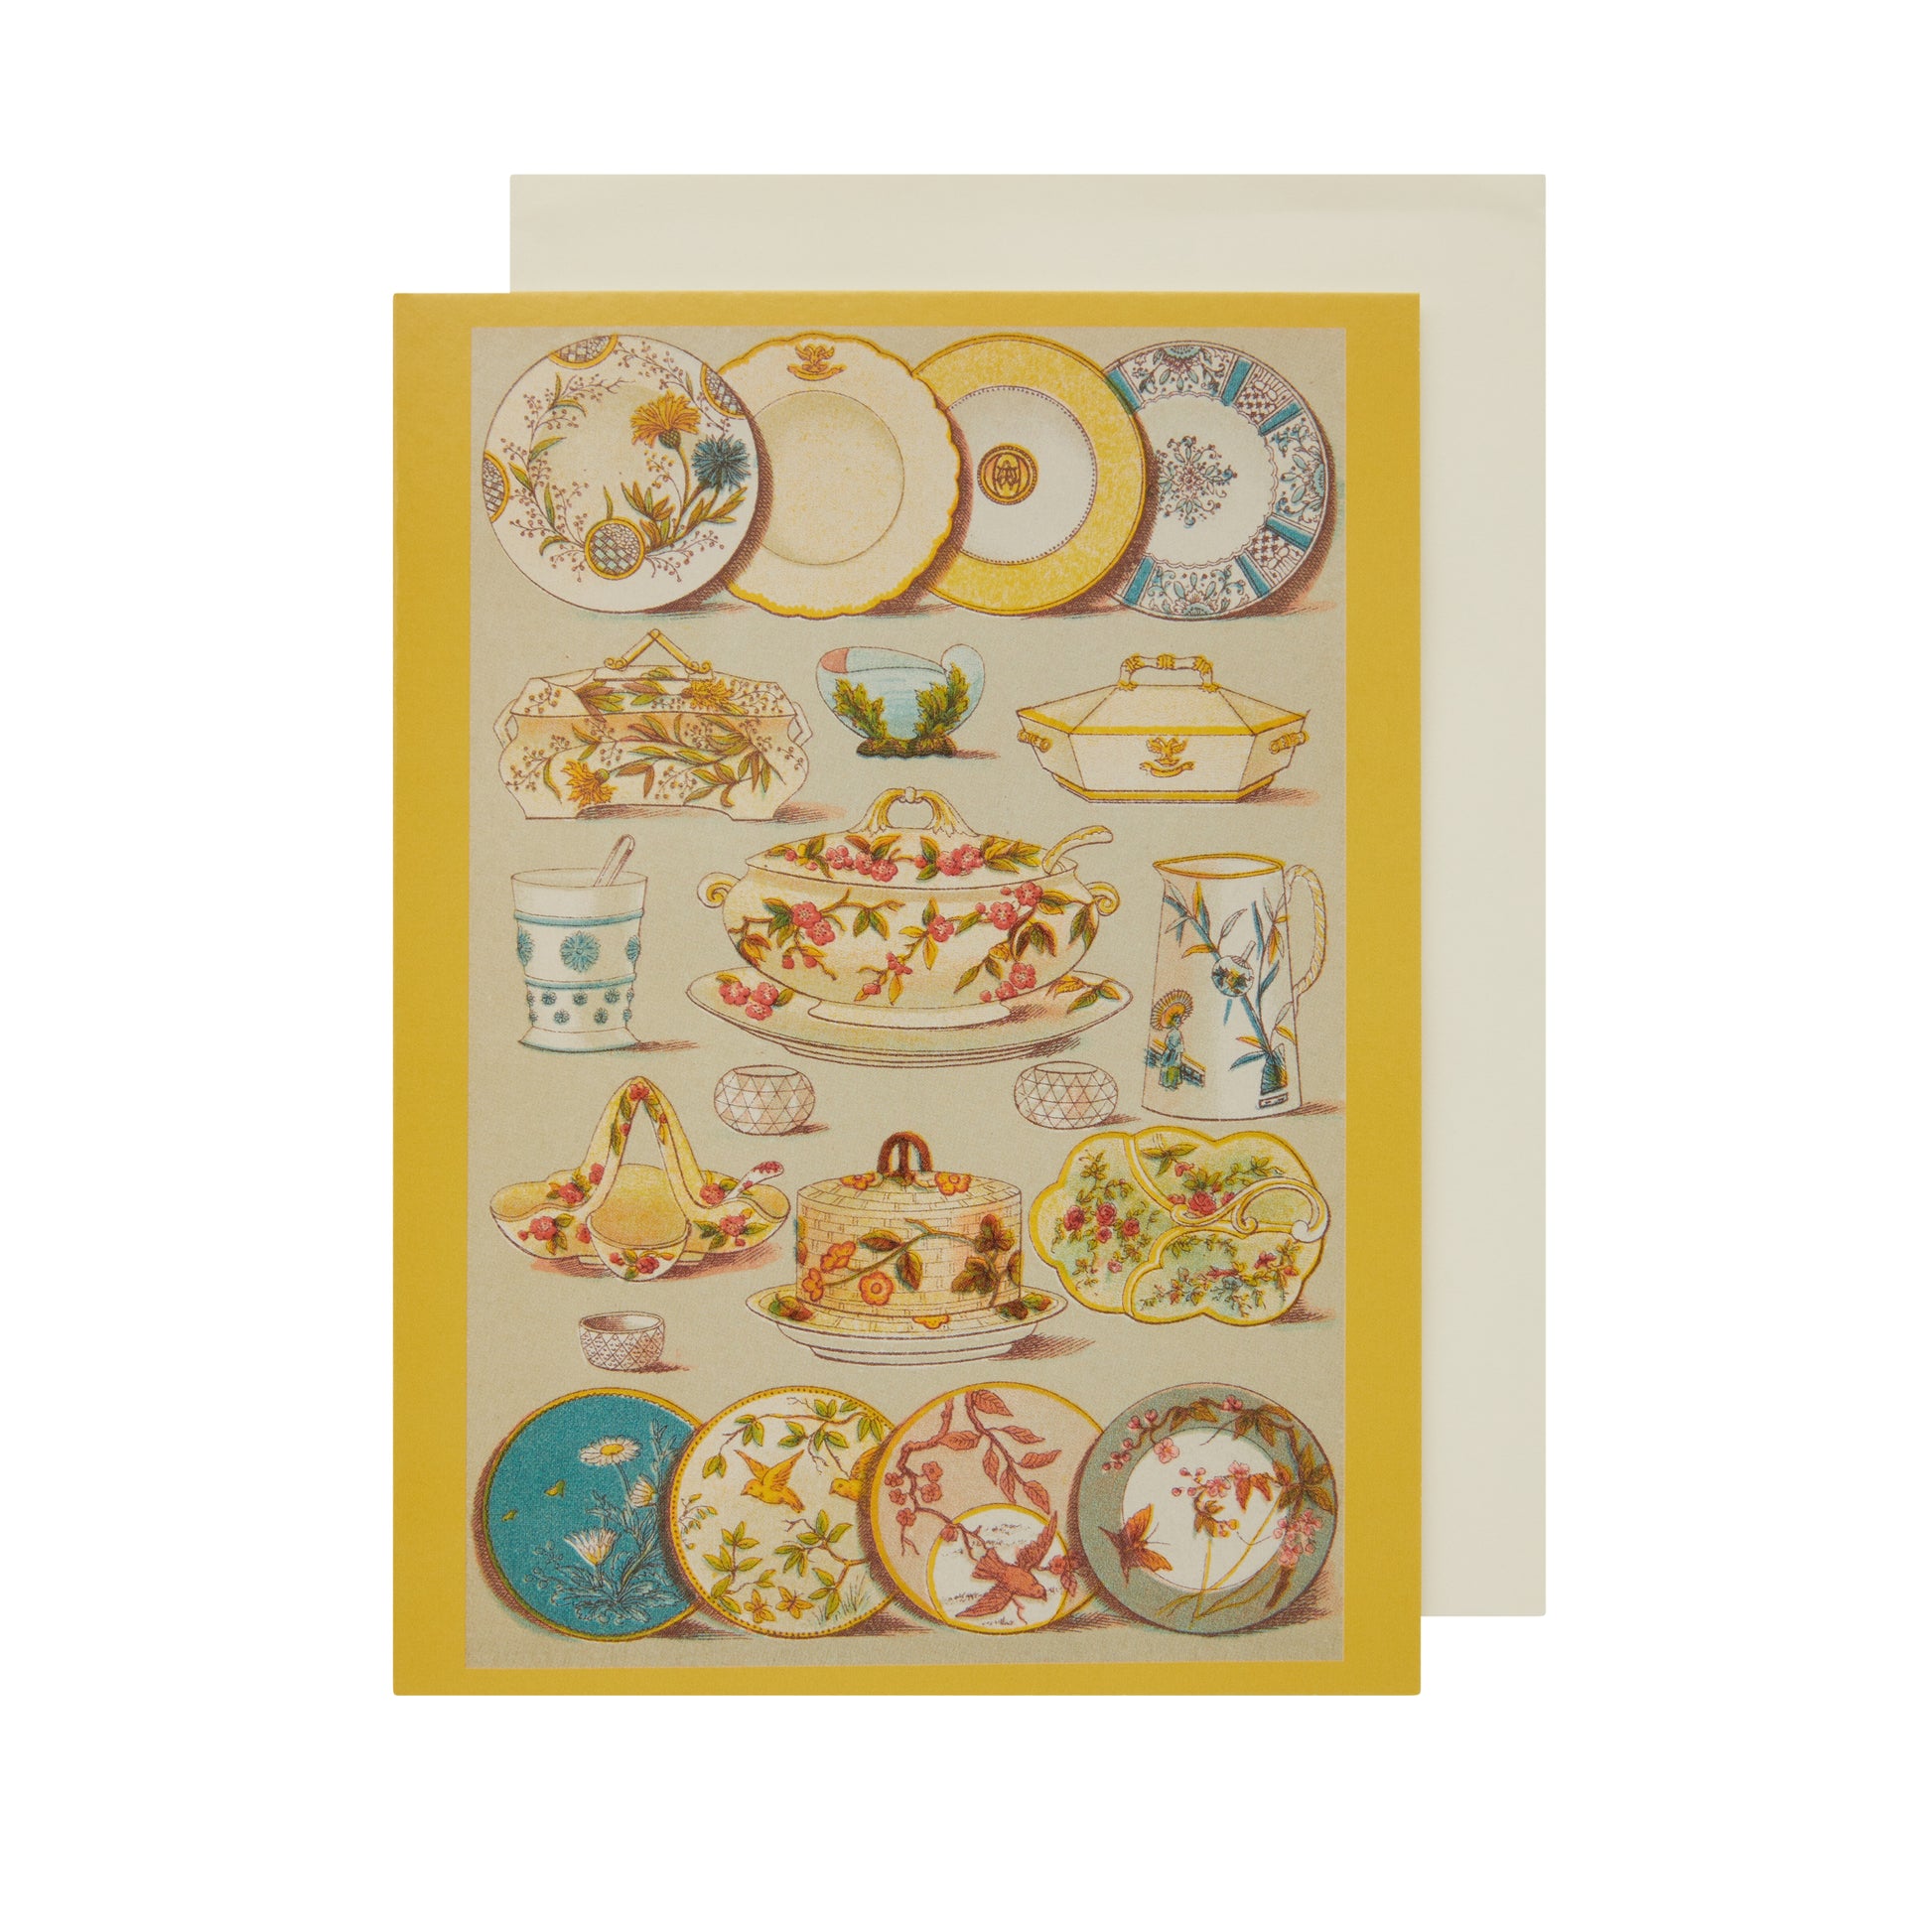 Greeting card, portrait format - dinner crockery from Mrs Beeton's Book of Household Management. Including colourful decorated dinner plates at top and bottom, an assortment of serving dishes, and a floral jug. With yellow border. From the collection of Cambridge University Library, brought to you by CuratingCambridge.co.uk